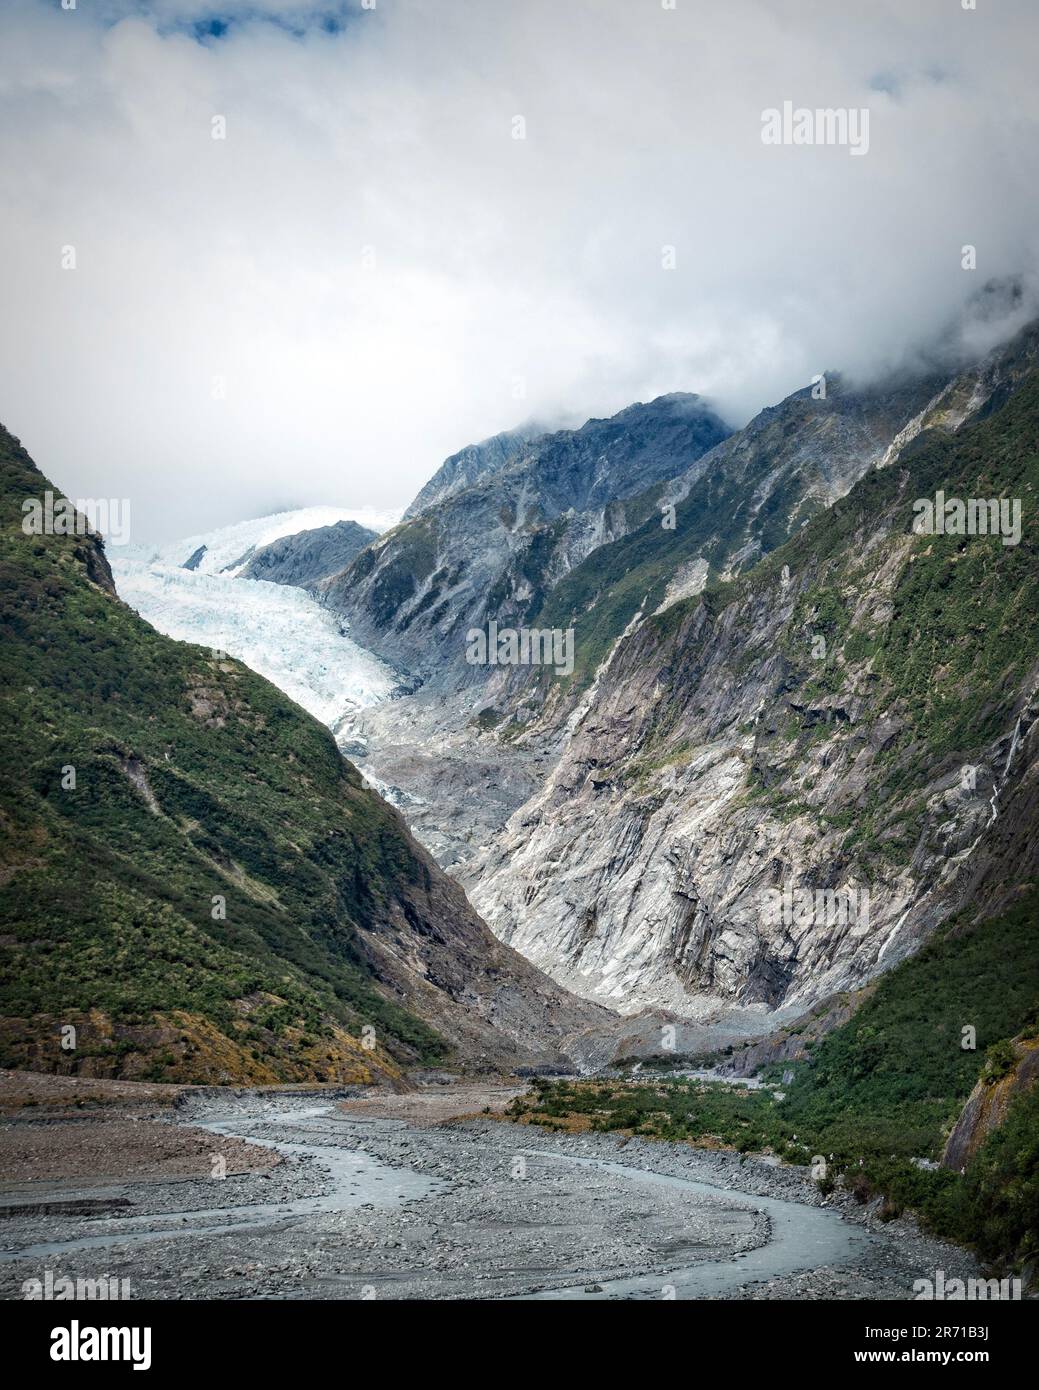 The retreating Franz Josef glacier on the South Island of New Zealand. Stock Photo